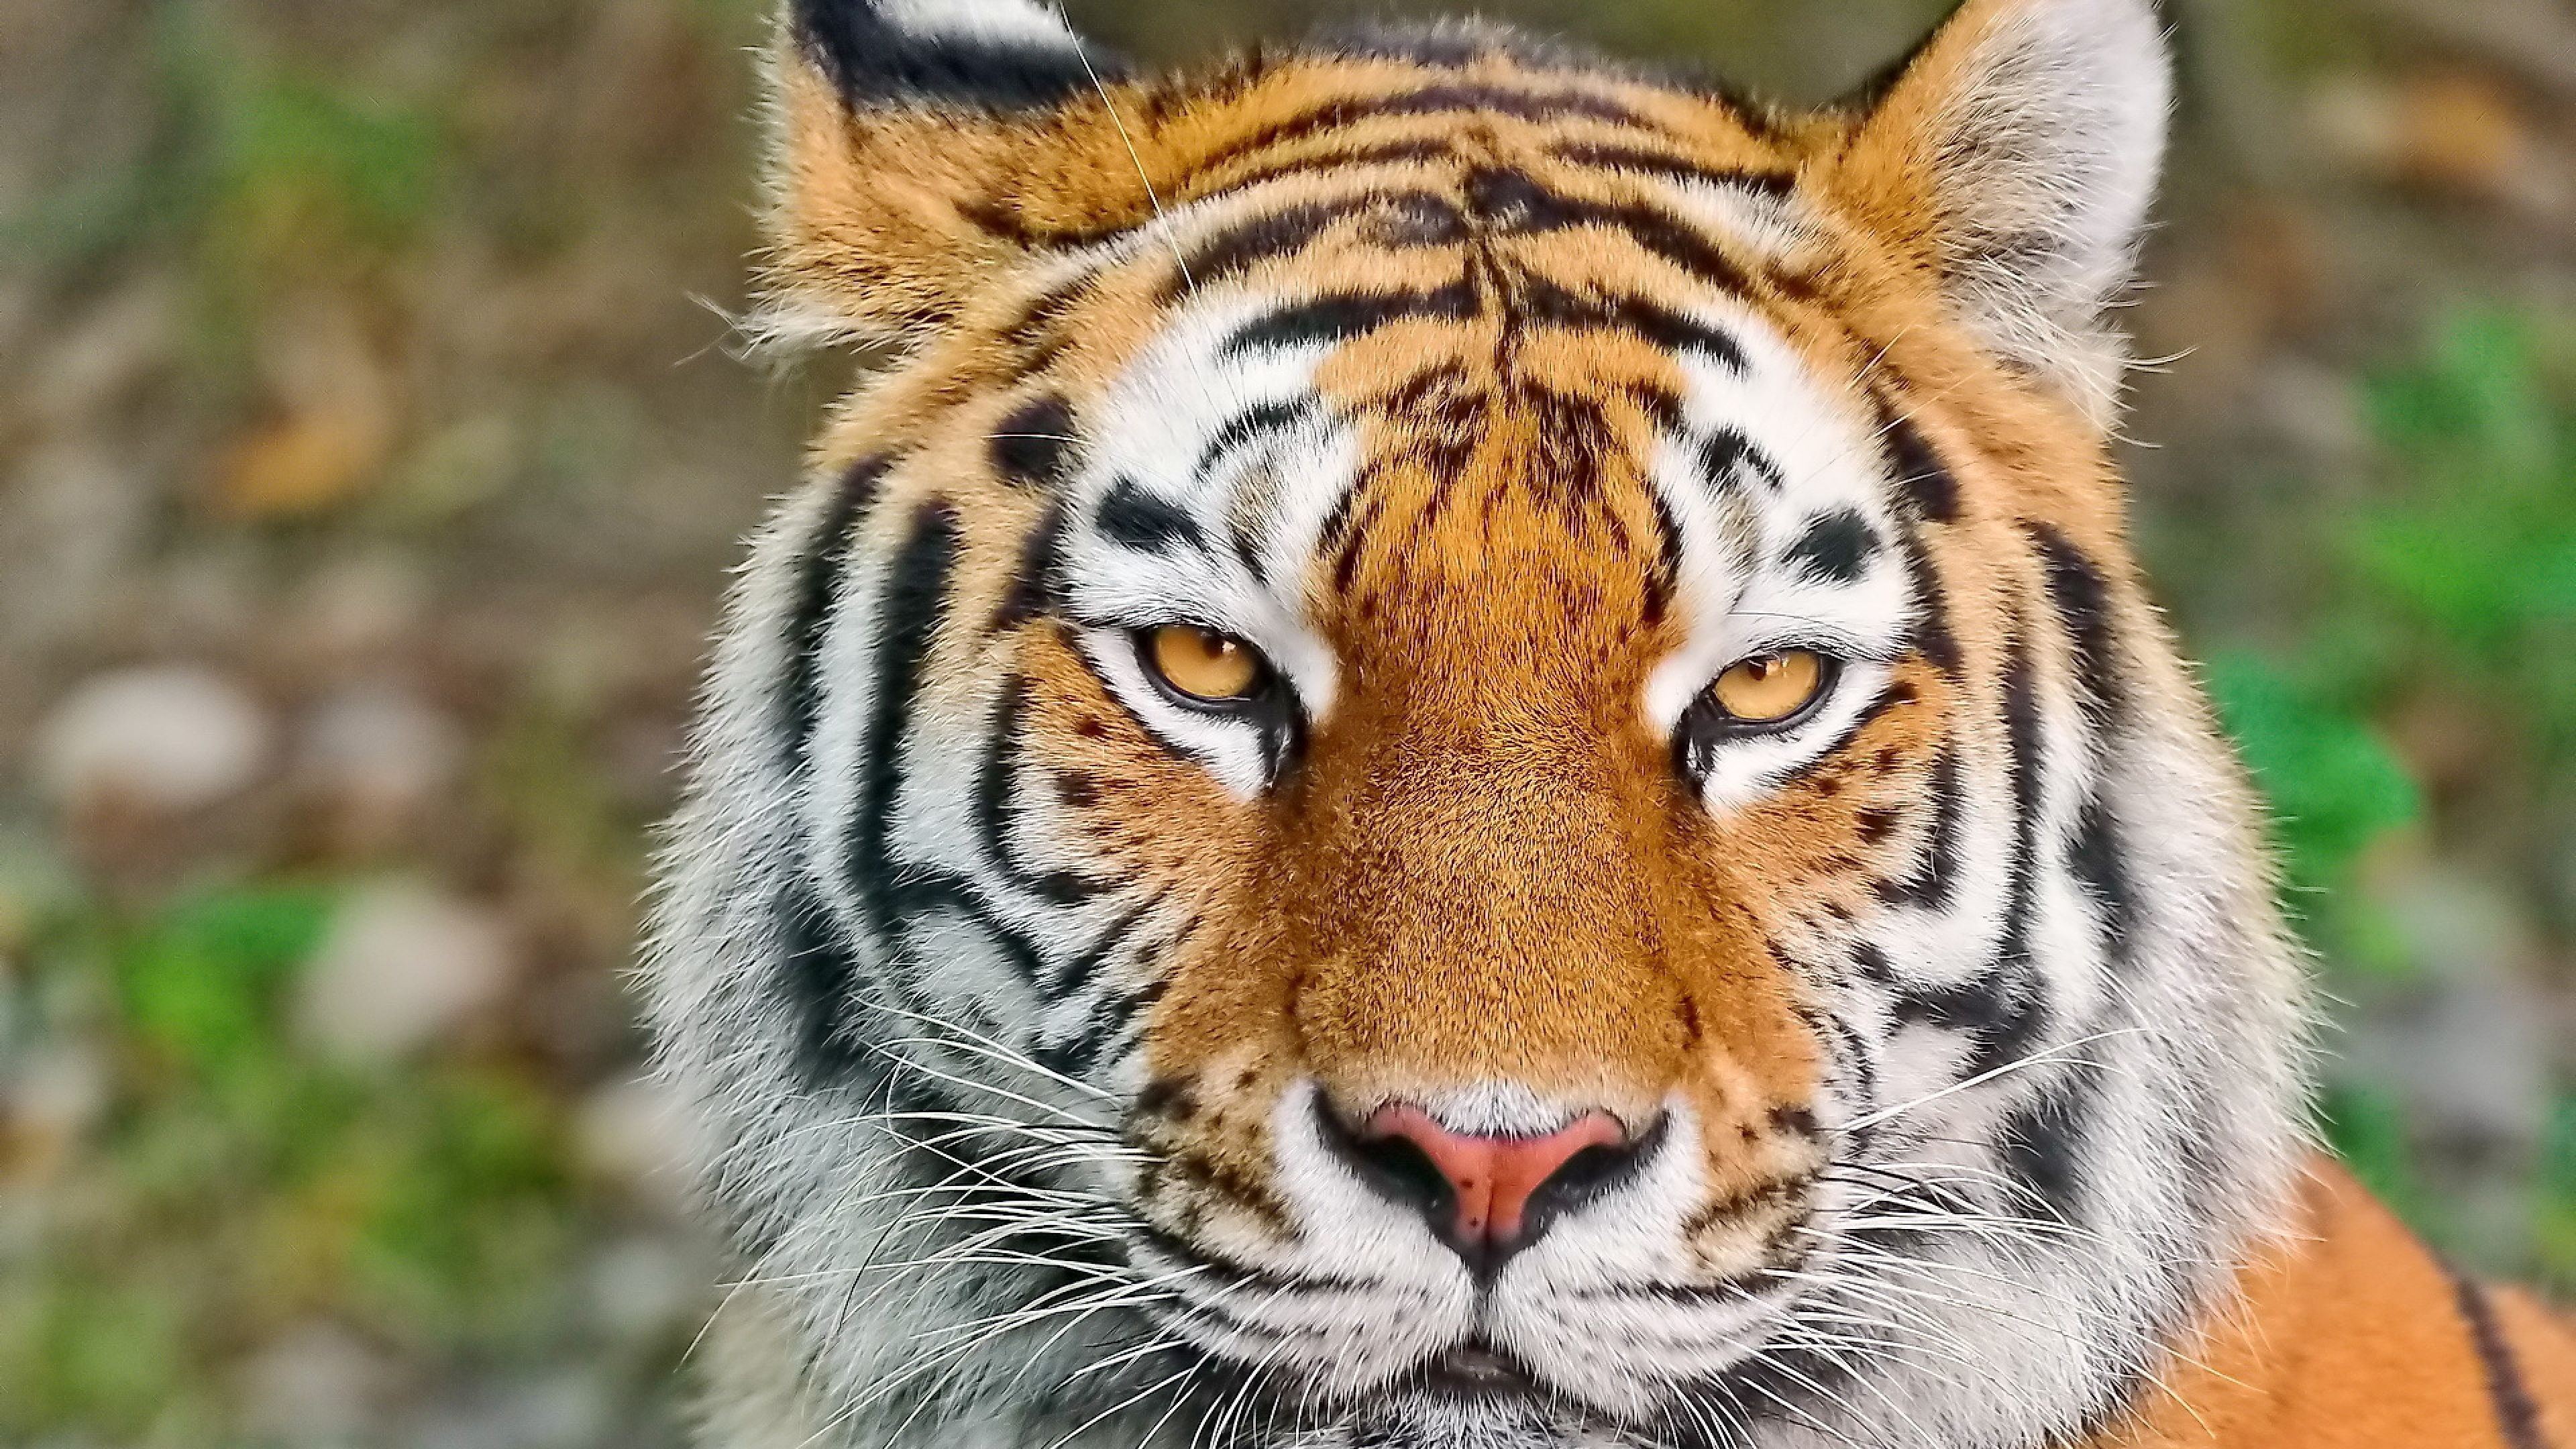 Download Wallpaper 3840x2160 Tiger, Face, Eyes, Aggression ...